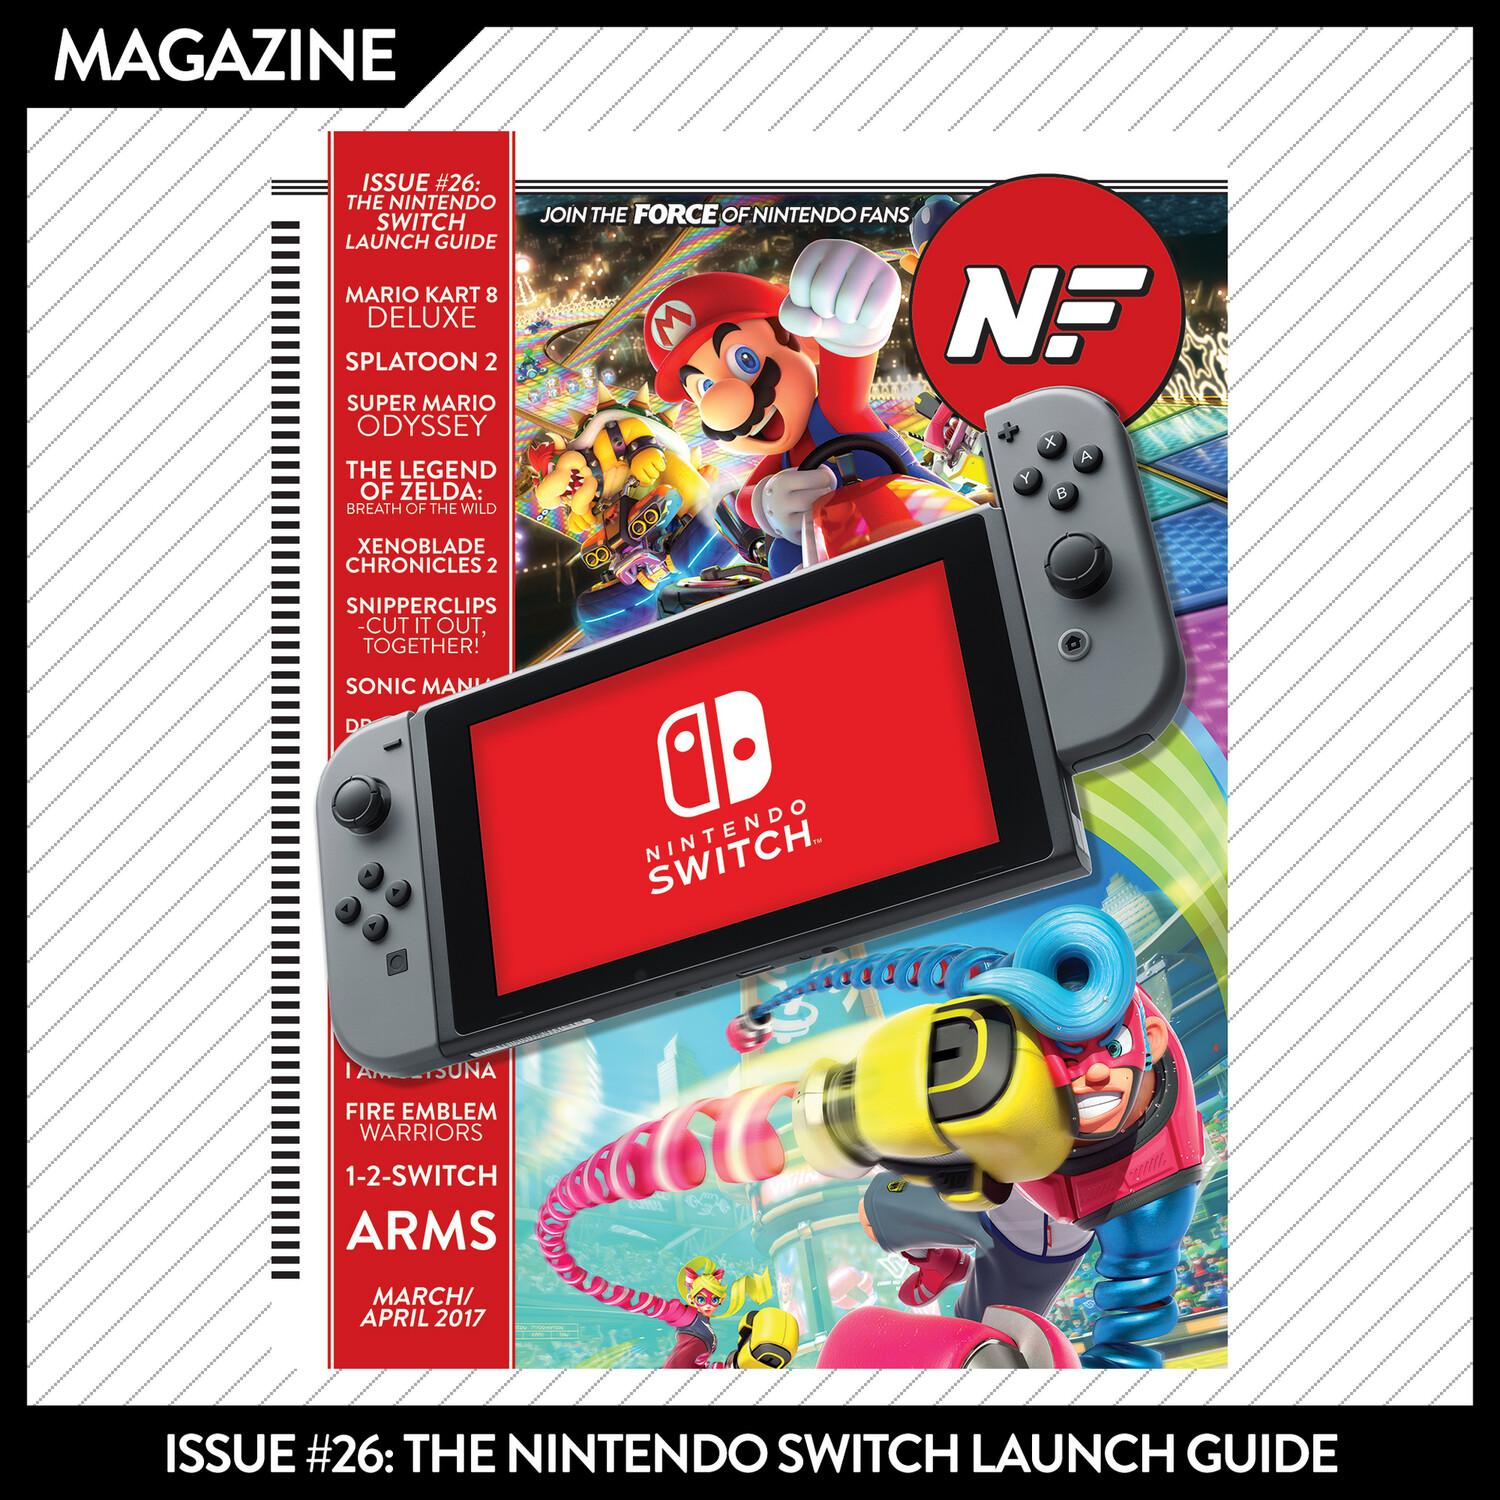 Issue #26: The Nintendo Switch Launch Guide – March/April 2017